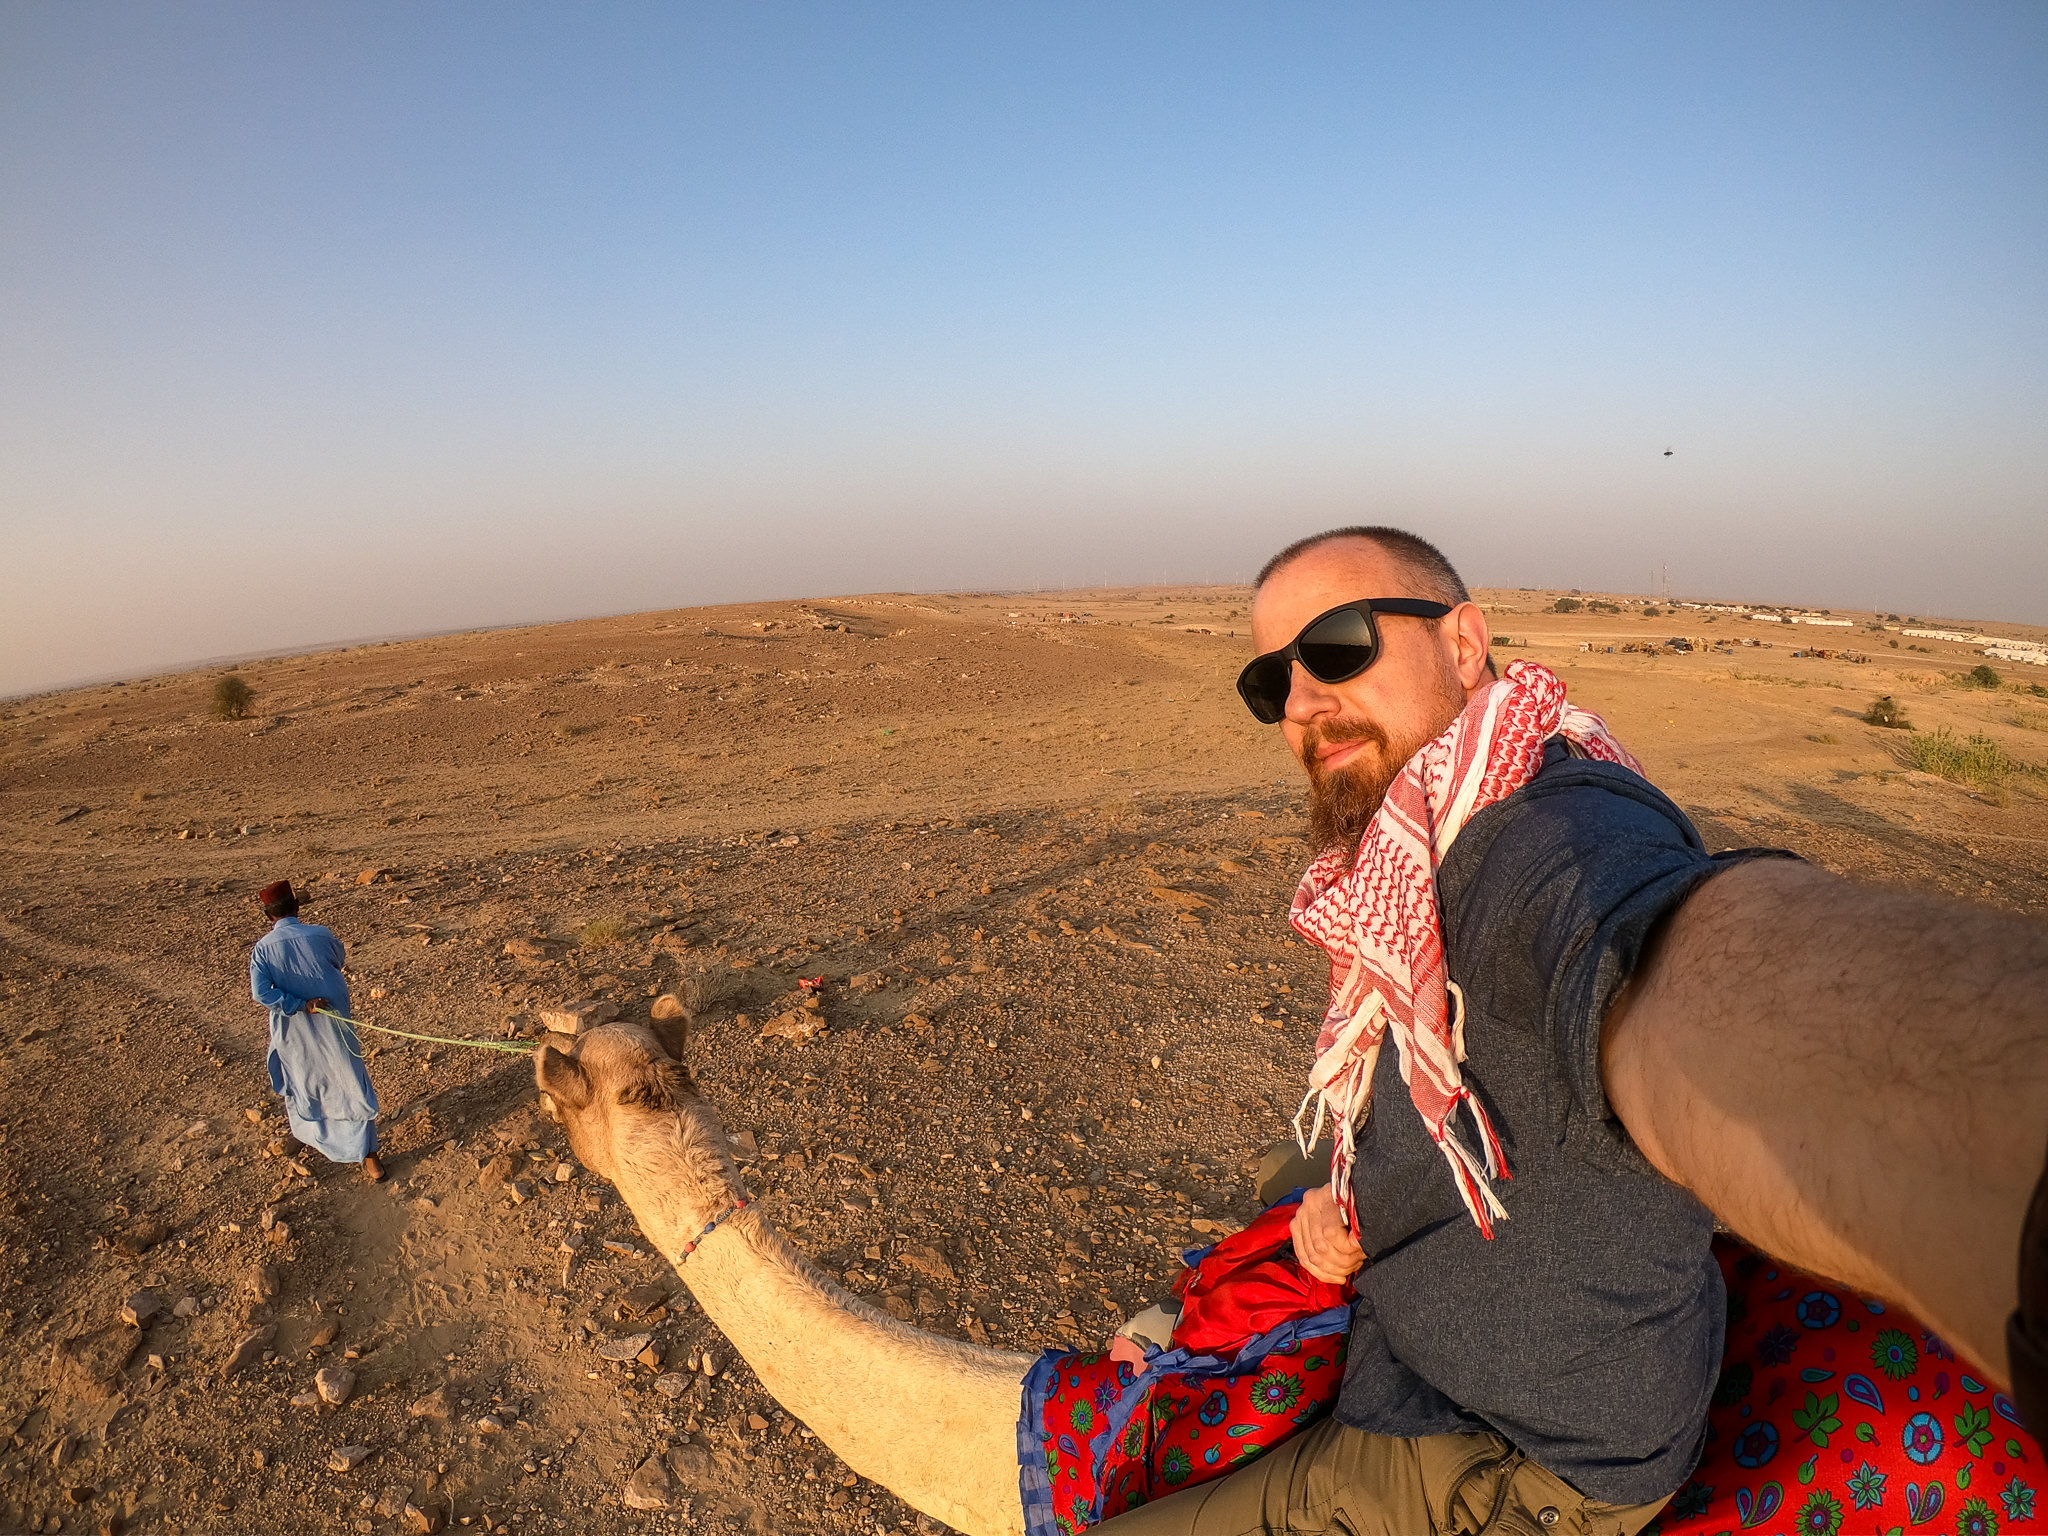 Your host, PhotoJoseph, braving a camel ride! It kinda hurts… but it's totally worth it!